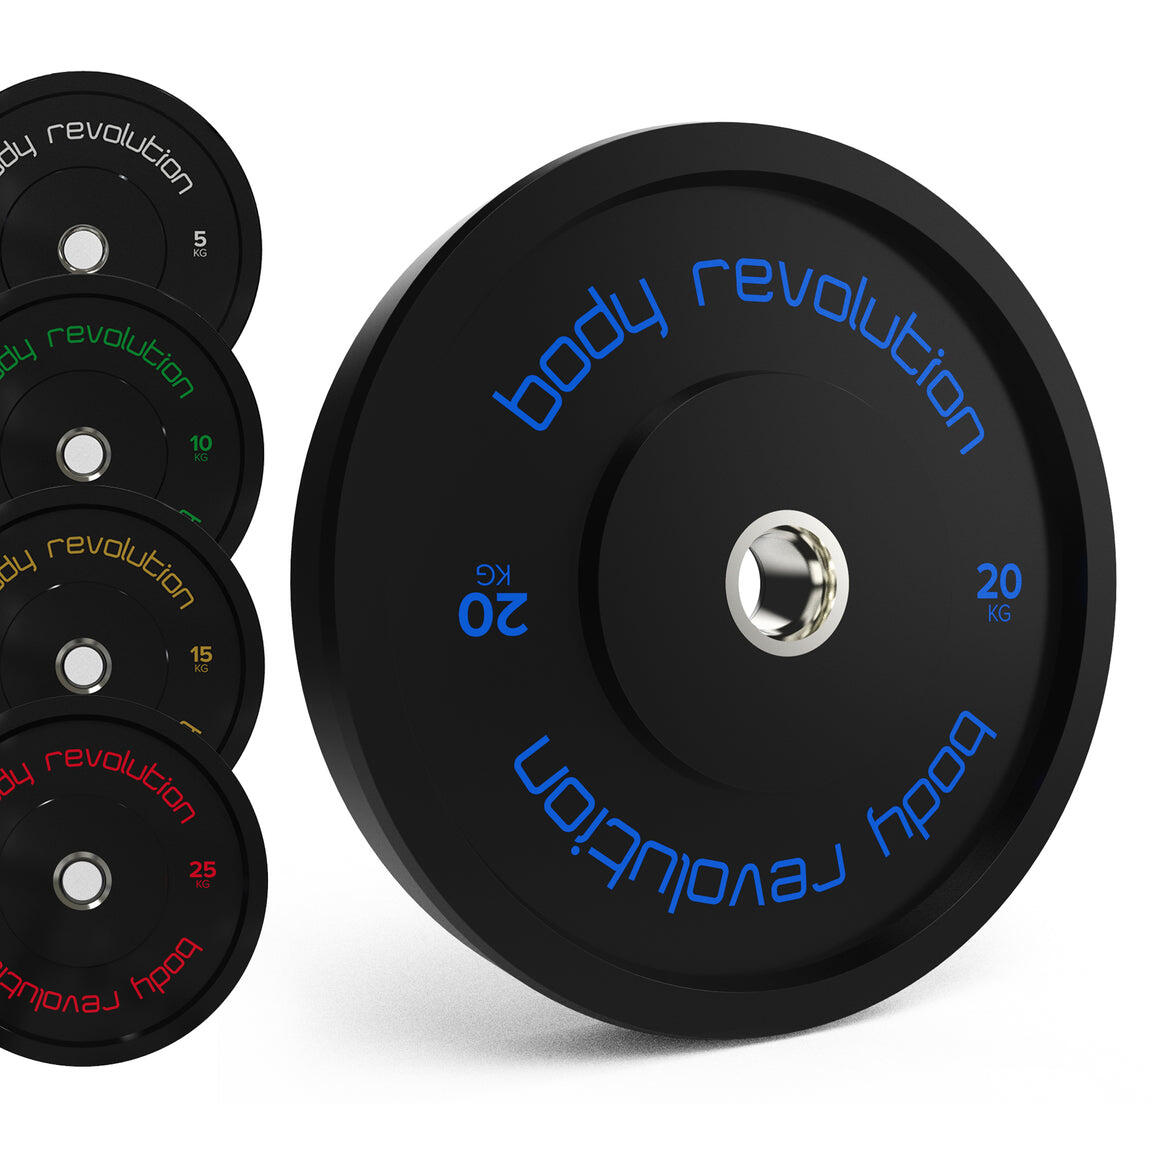 BODY REVOLUTION Olympic Bumper Plates - Black Rubber Coated Weight Plates 20kg (Pair)